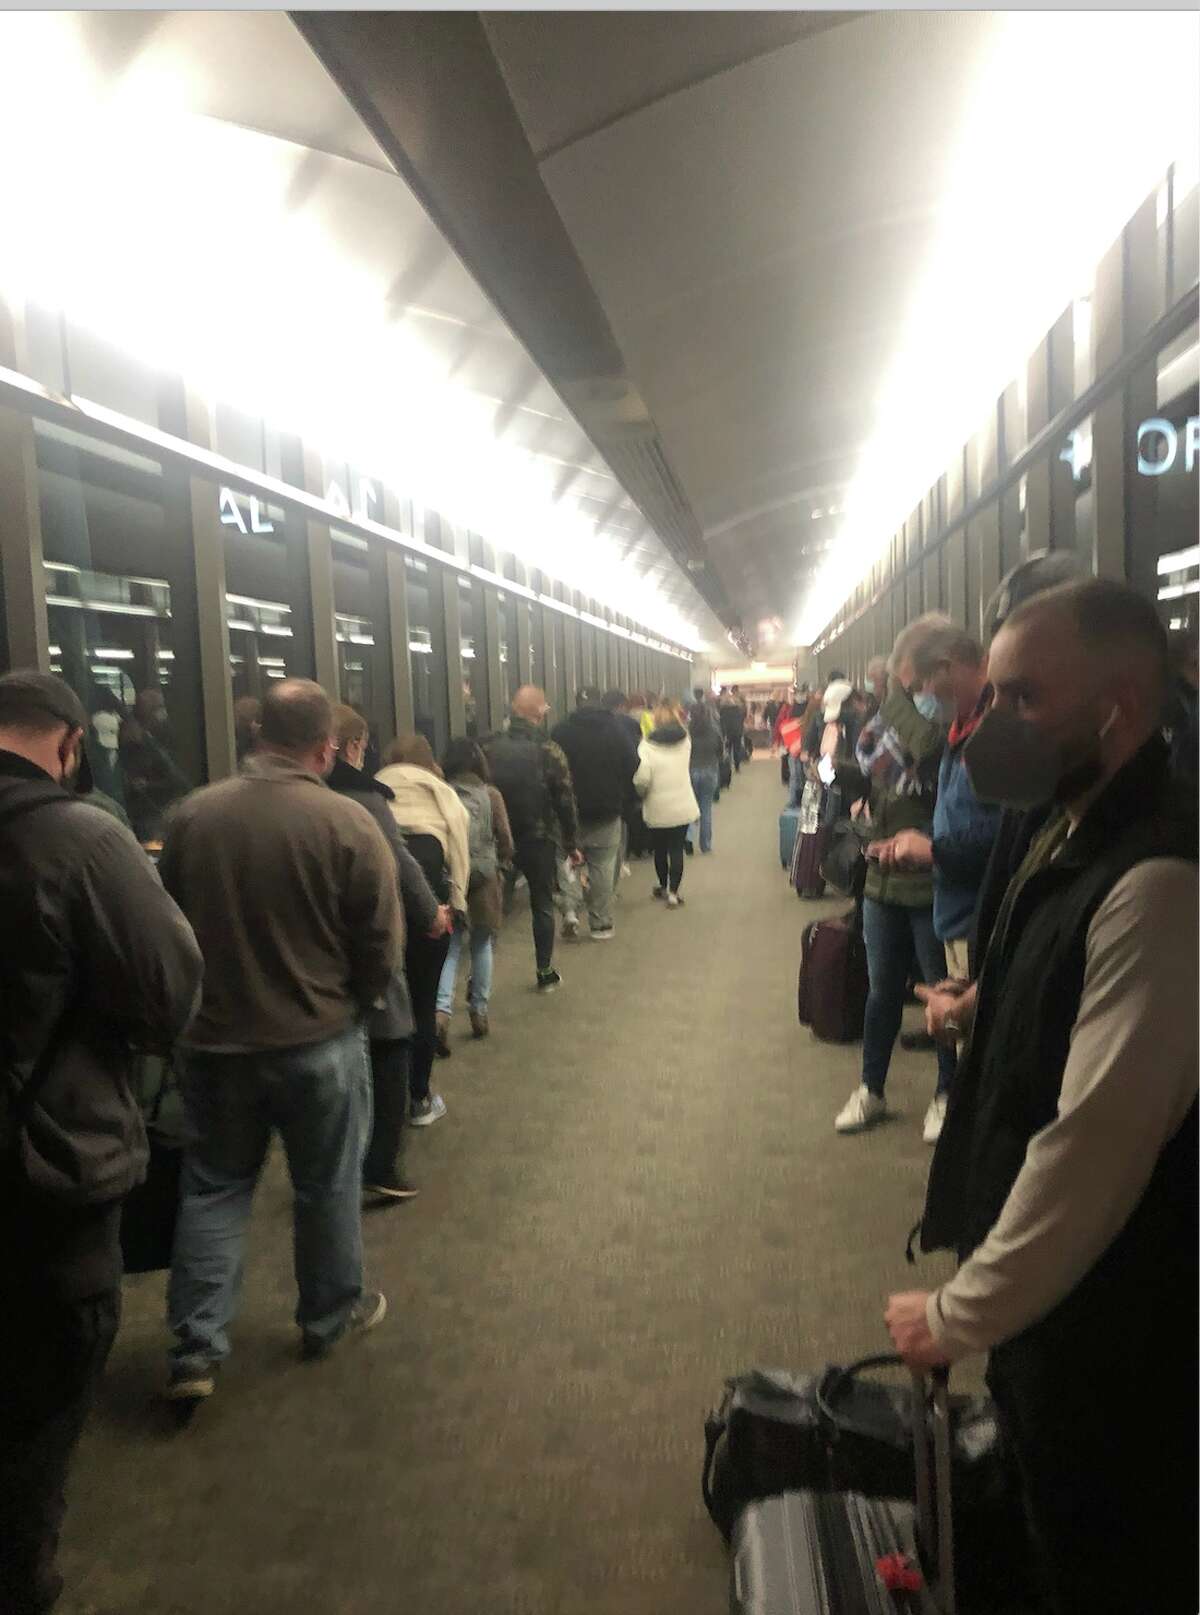 Passengers queue up at Albany International Airport on Sunday, Nov. 28, 2021. Airport officials said long lines are now common during peak periods. They are working on how to address the issue.